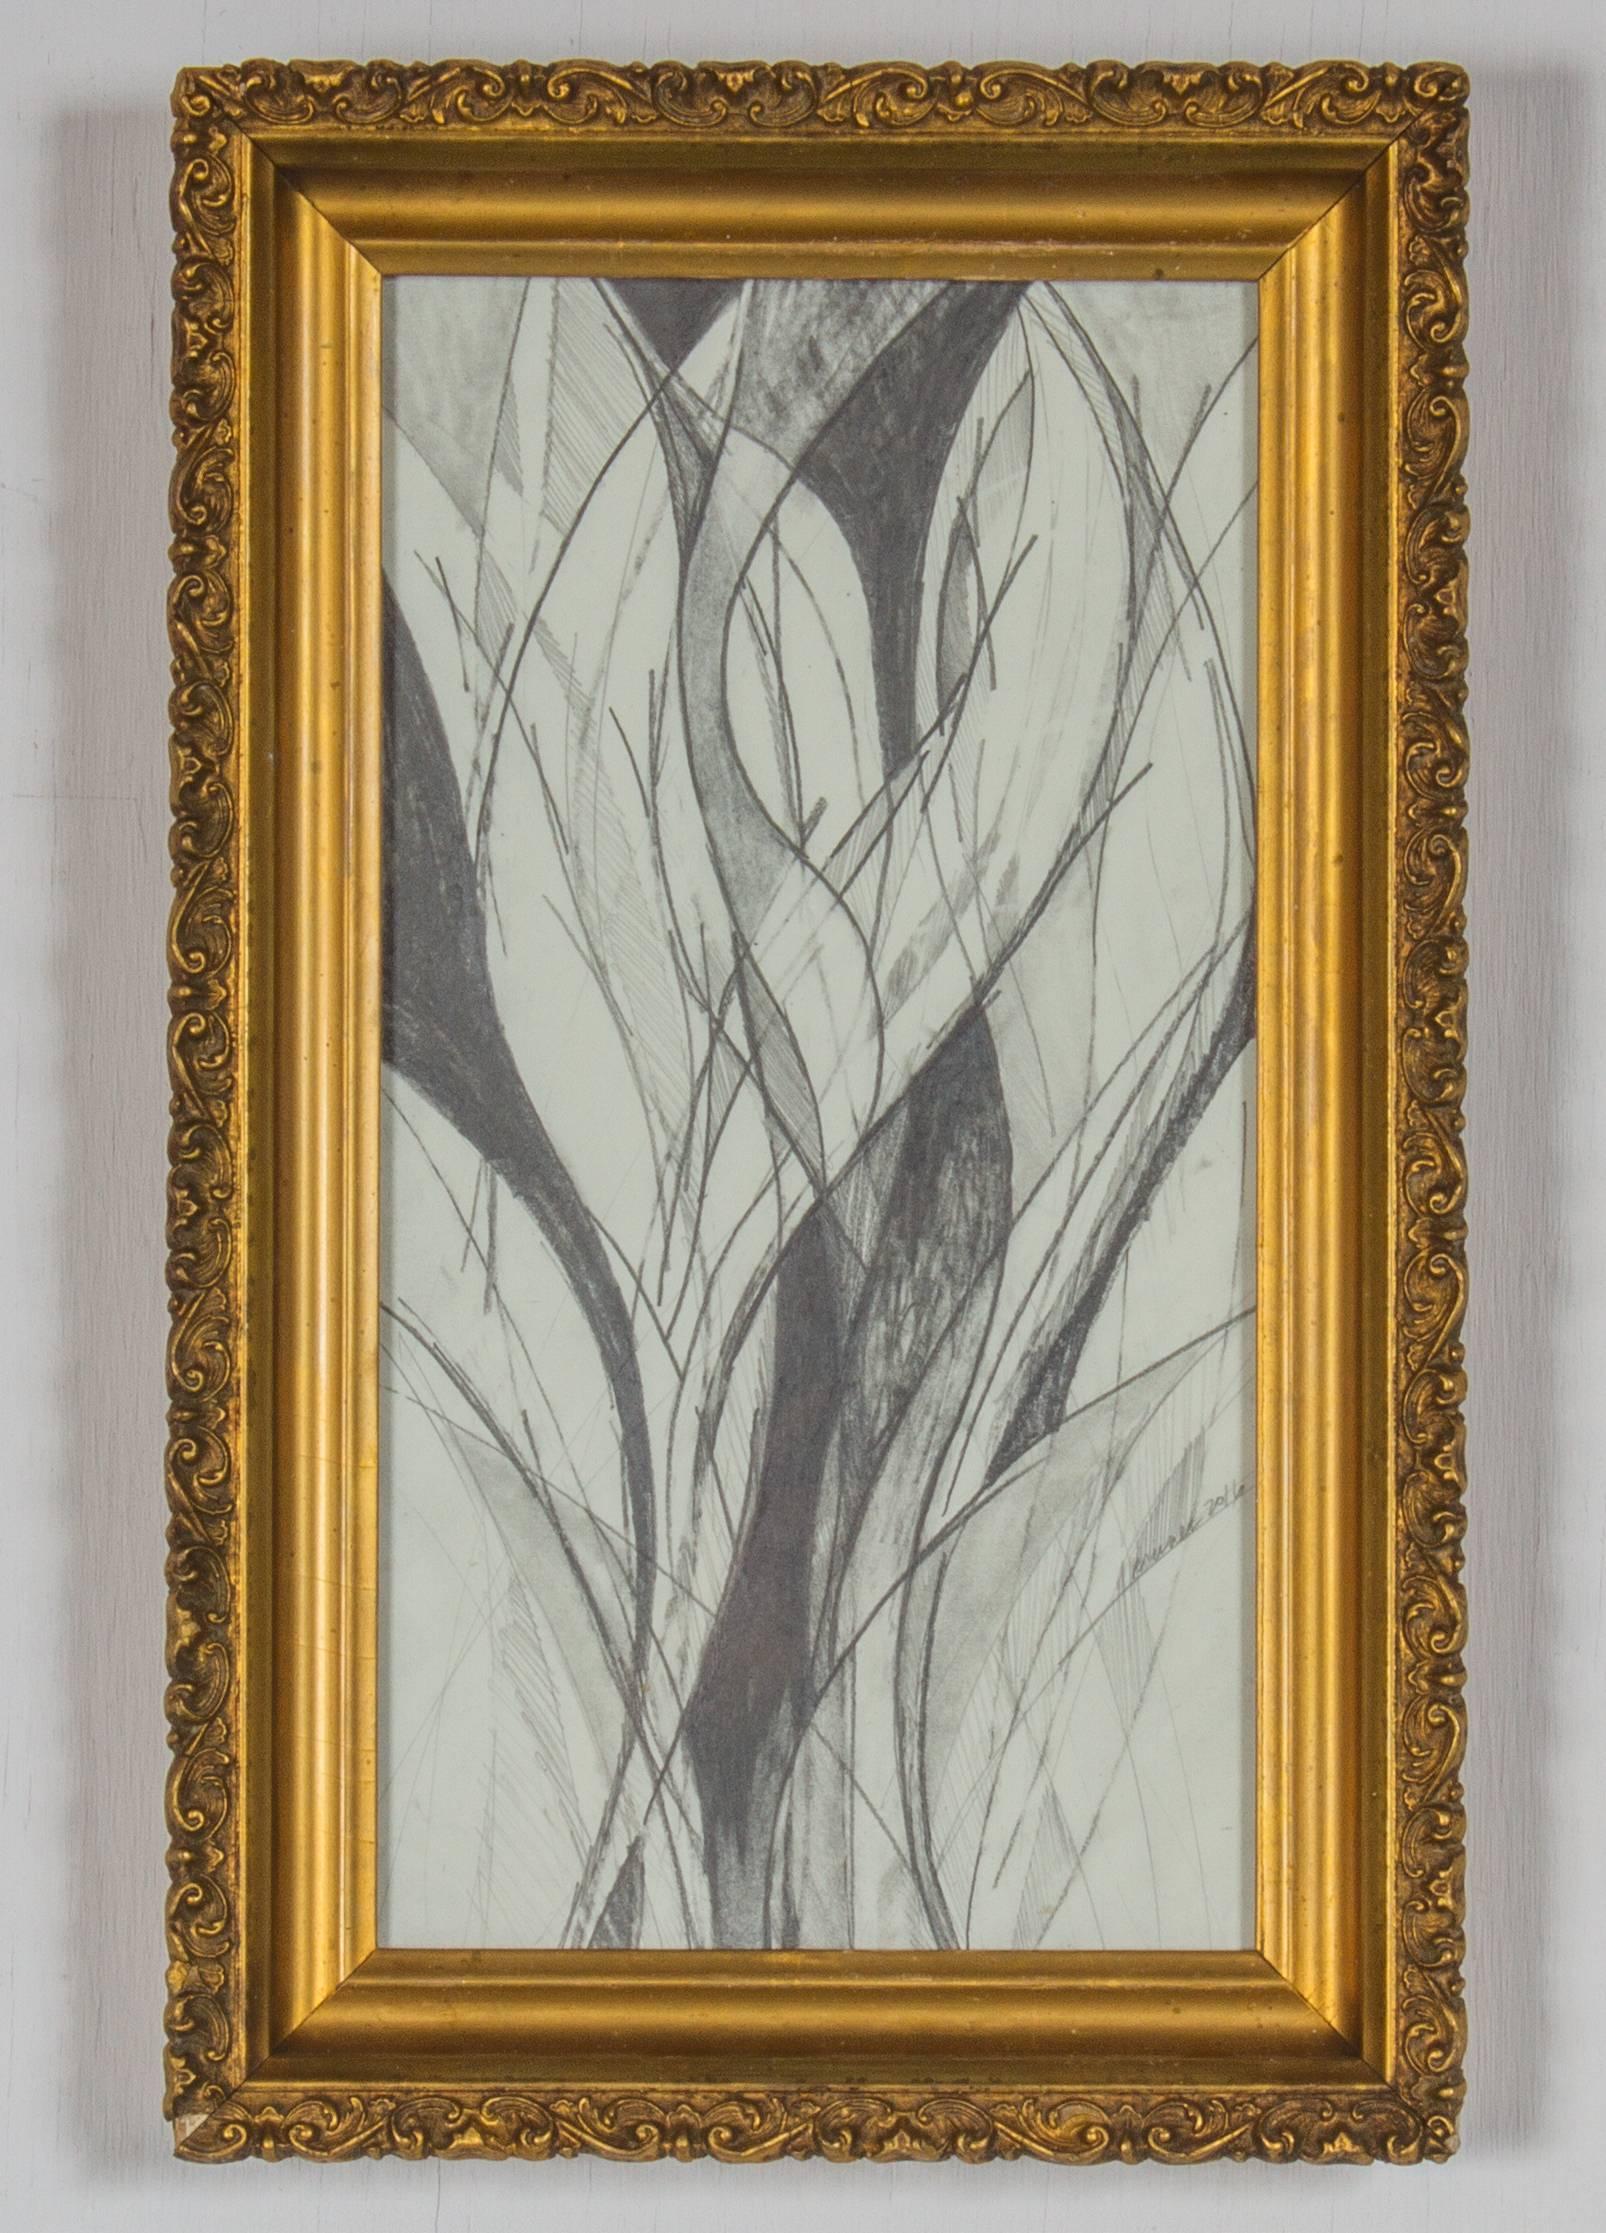 Calla Lilies (Abstract Floral Still Life Drawing in Vintage Frame)